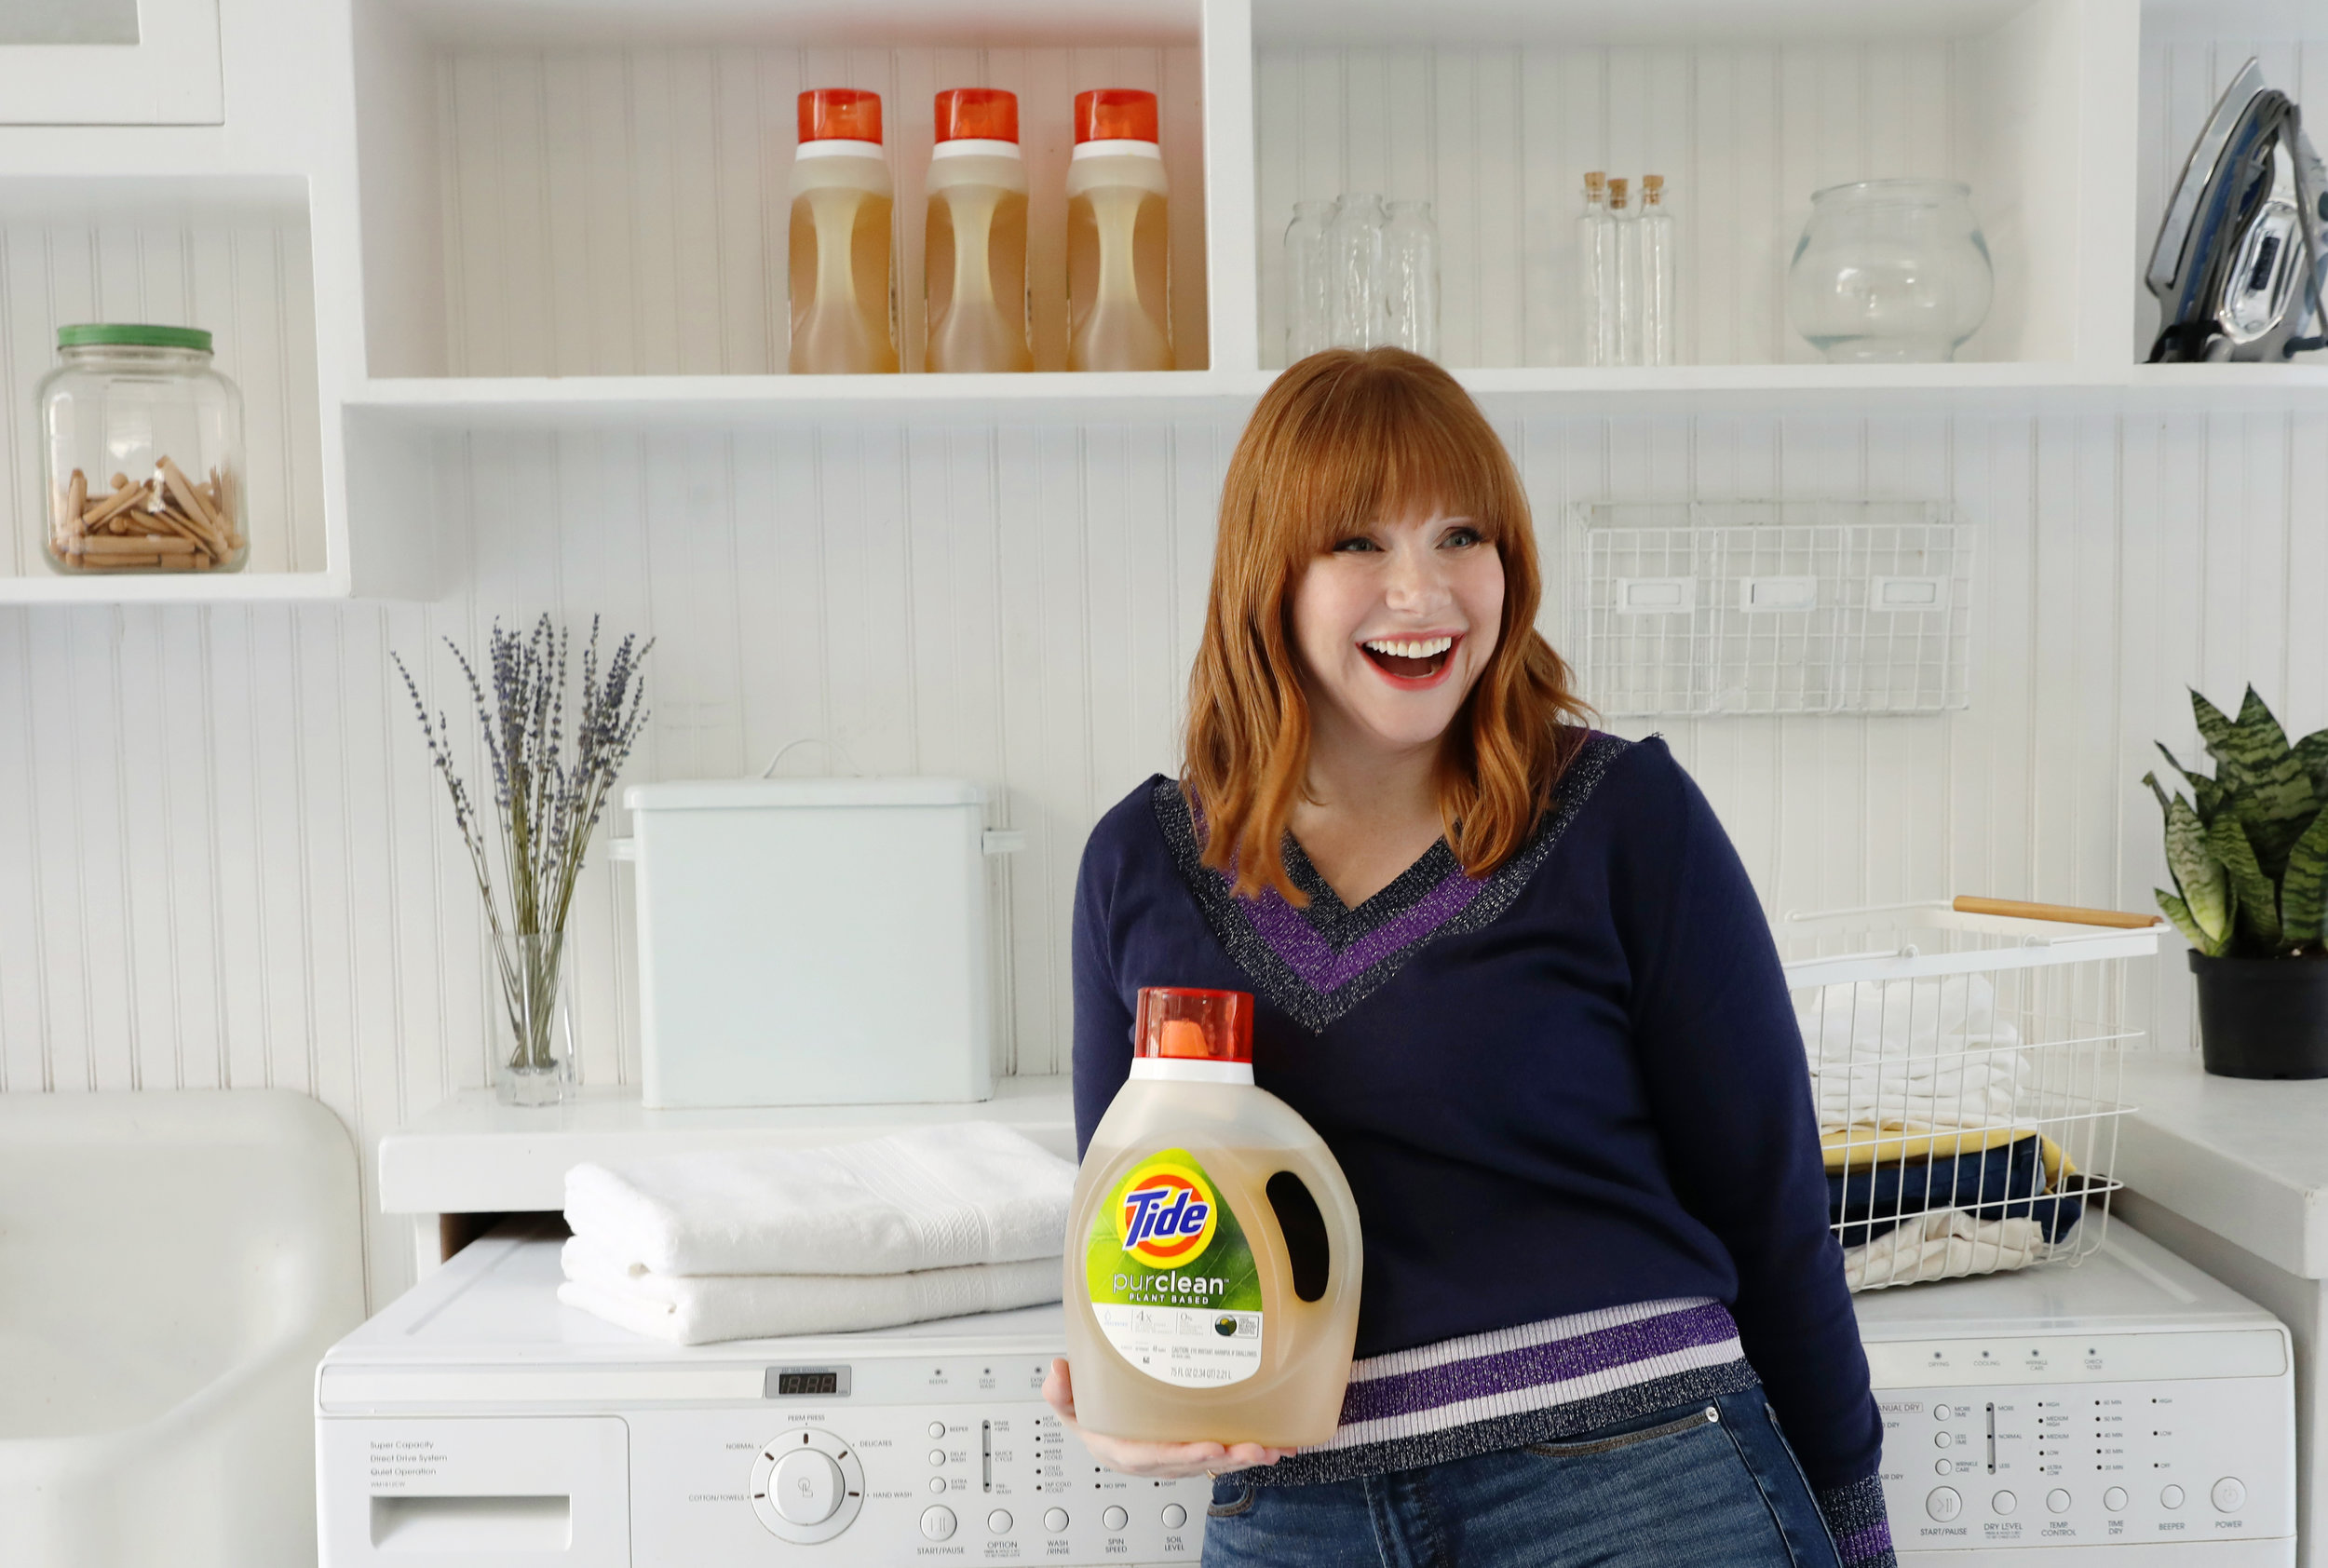 NYC commercial lifestyle photographer JENNIFER LAVELLE PHOTOGRAPHY - Procter &amp; Gamble, Tide Purclean, P&amp;G, Bryce Dallas Howard, New York City lifestyle photographer, Procter &amp; Gamble